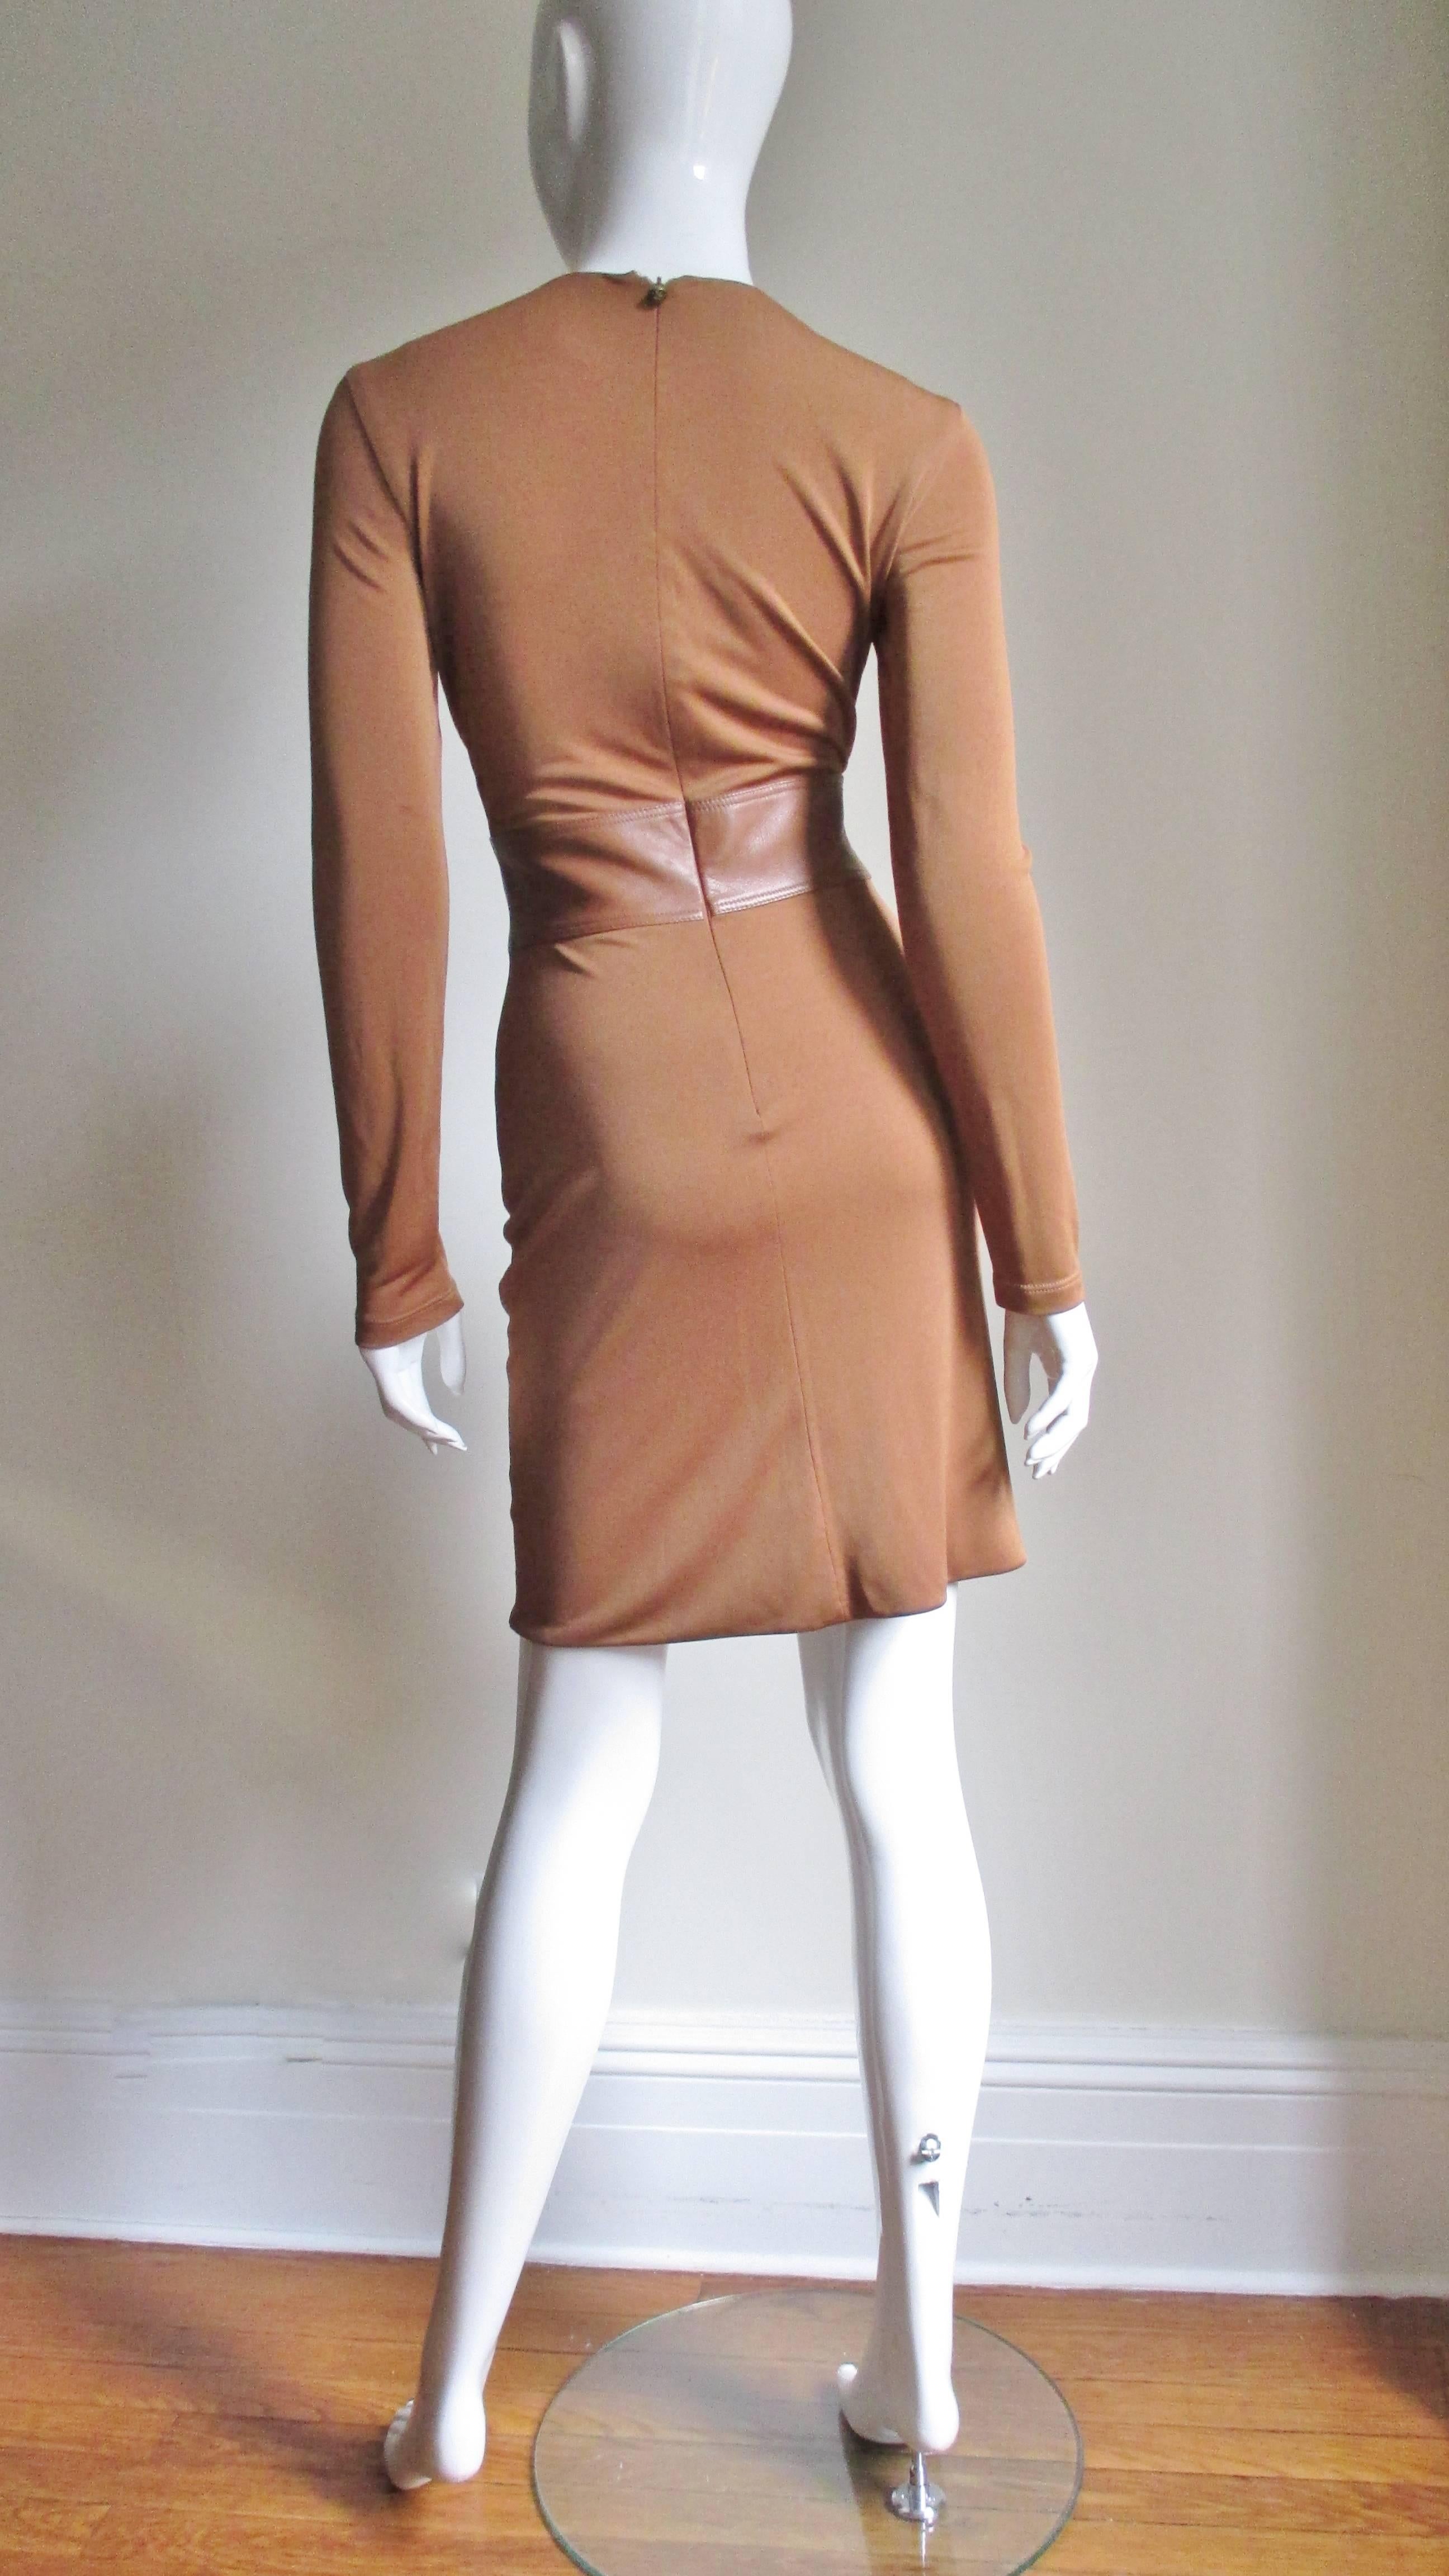 Gianni Versace Silk Jersey Dress with Leather Waist A/W 2001 For Sale 2